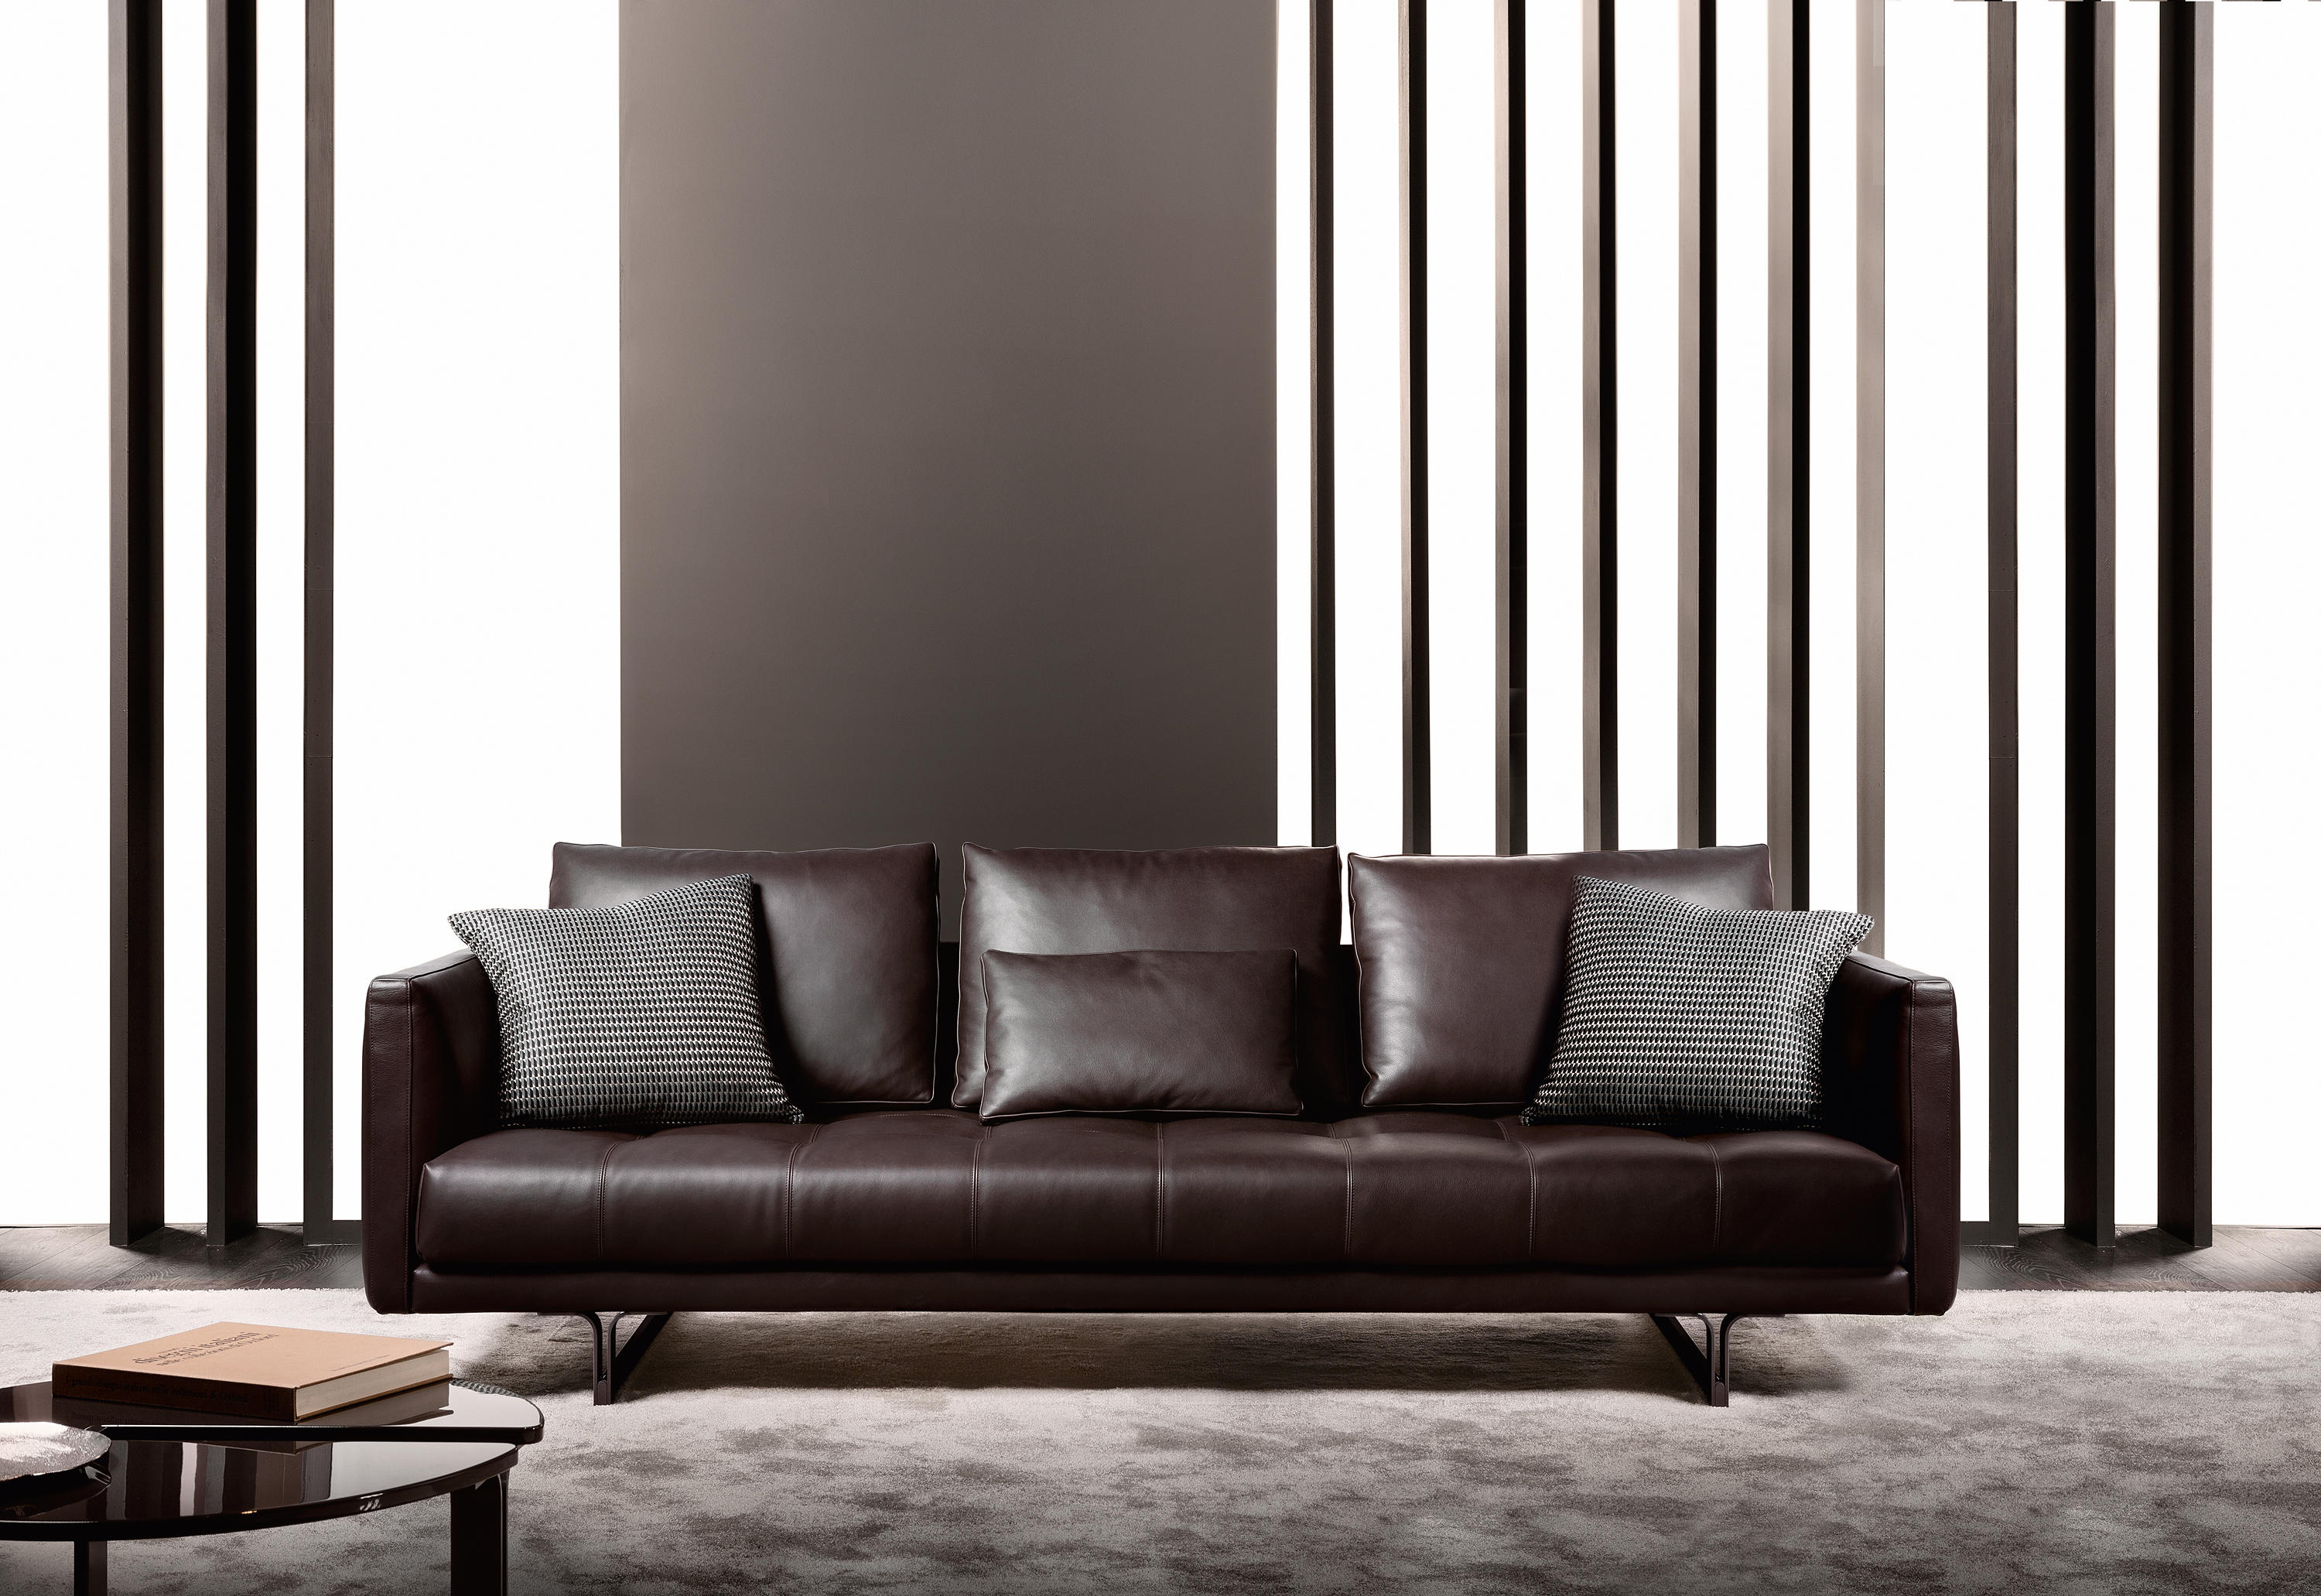 VALERY - Sofas from Alberta Pacific Furniture | Architonic